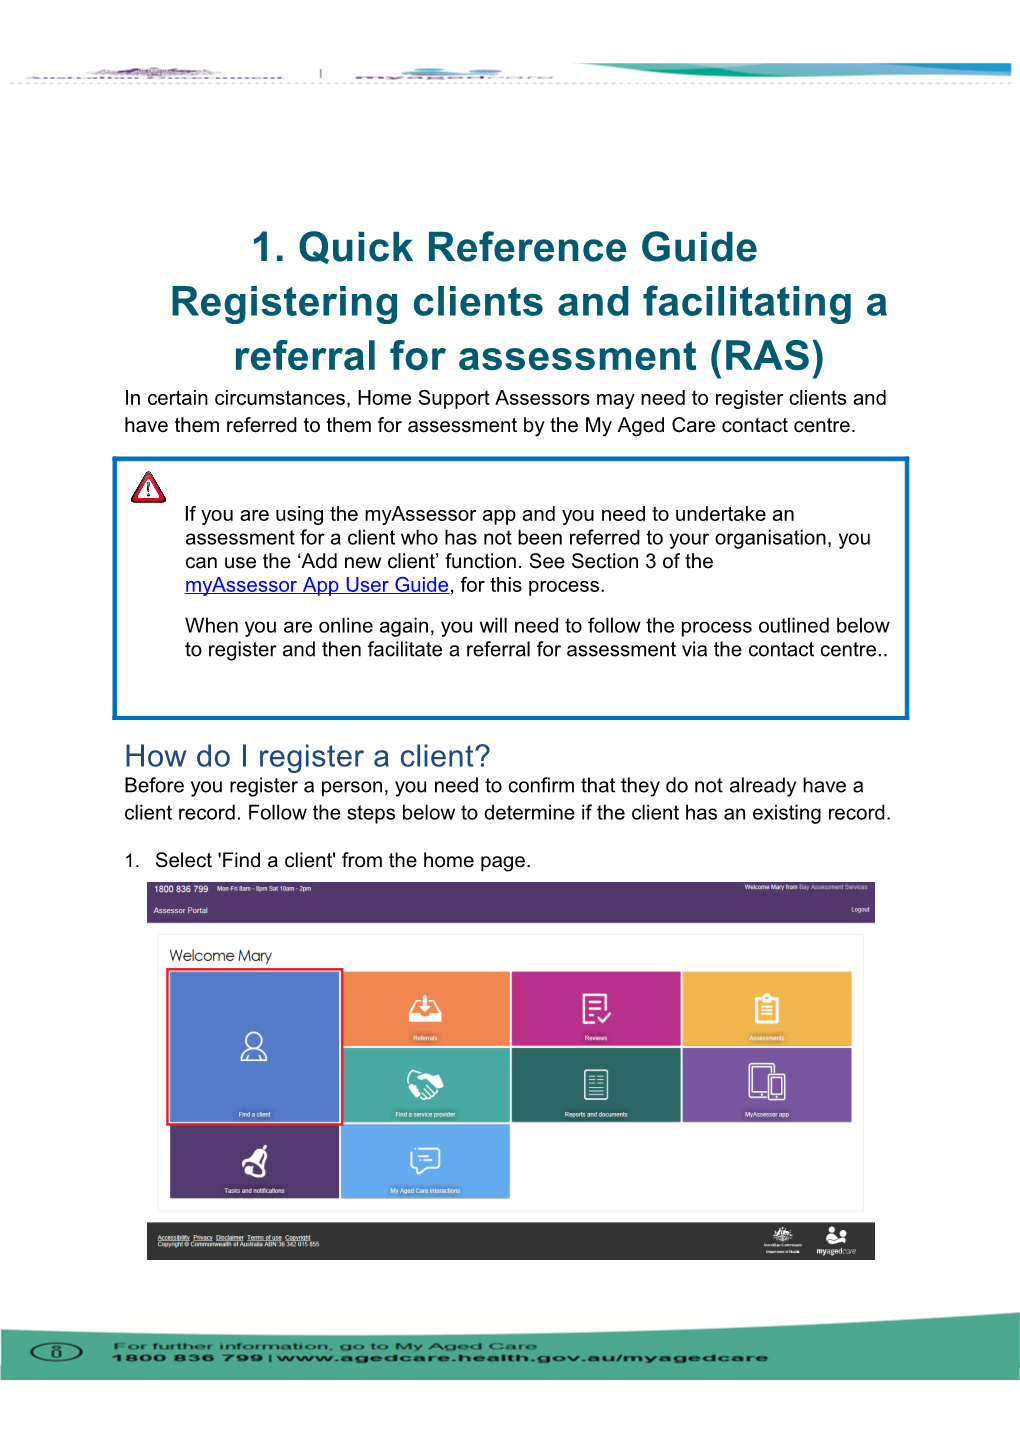 1. Quick Reference Guideregistering Clients and Facilitating a Referral for Assessment(RAS)